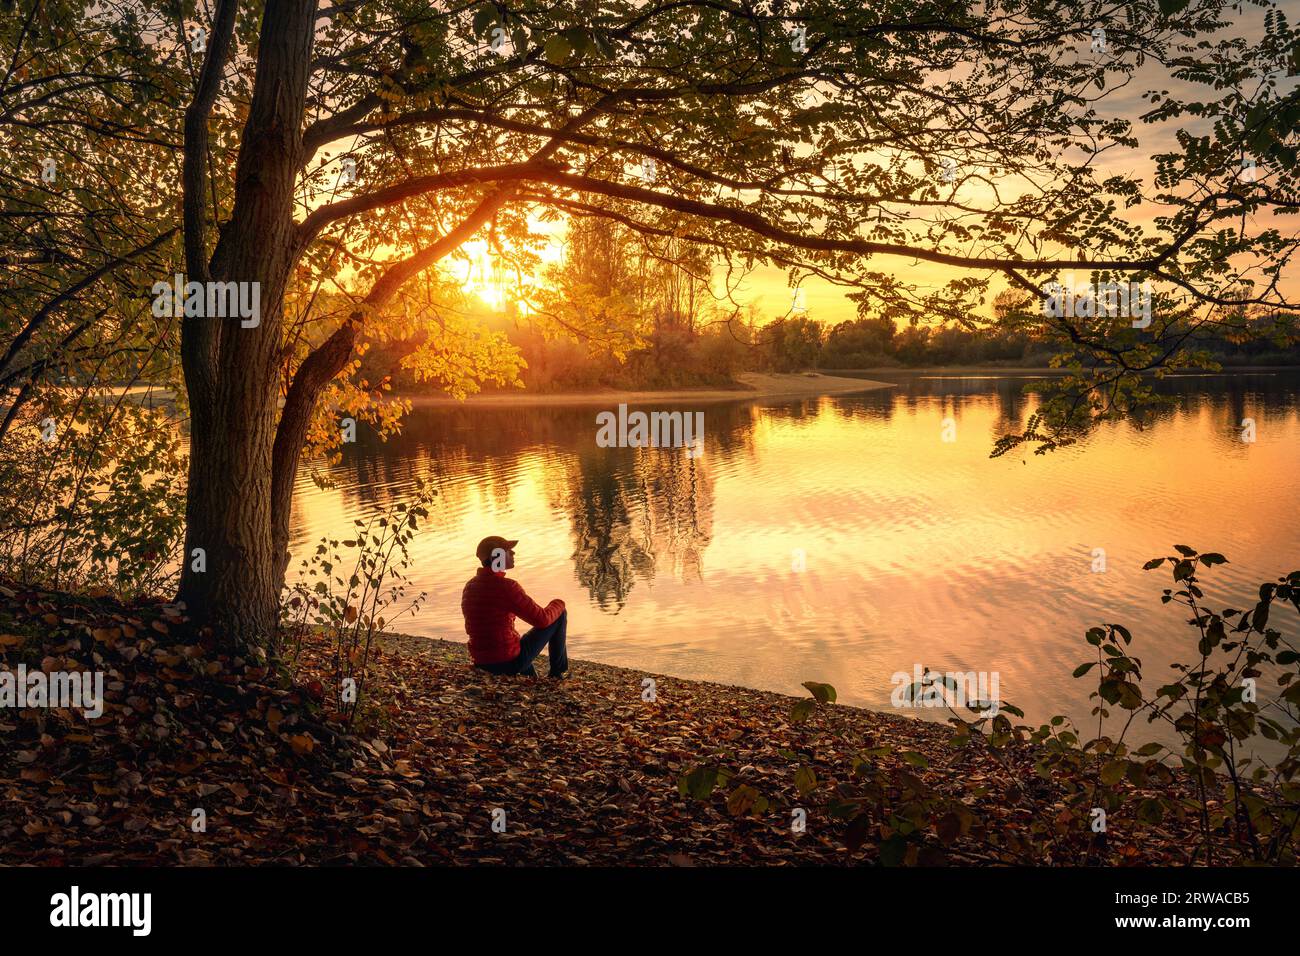 Man sitting under a tree and enjoying a tranquil beautiful sunset at a lake alone, with warm glowing colors Stock Photo